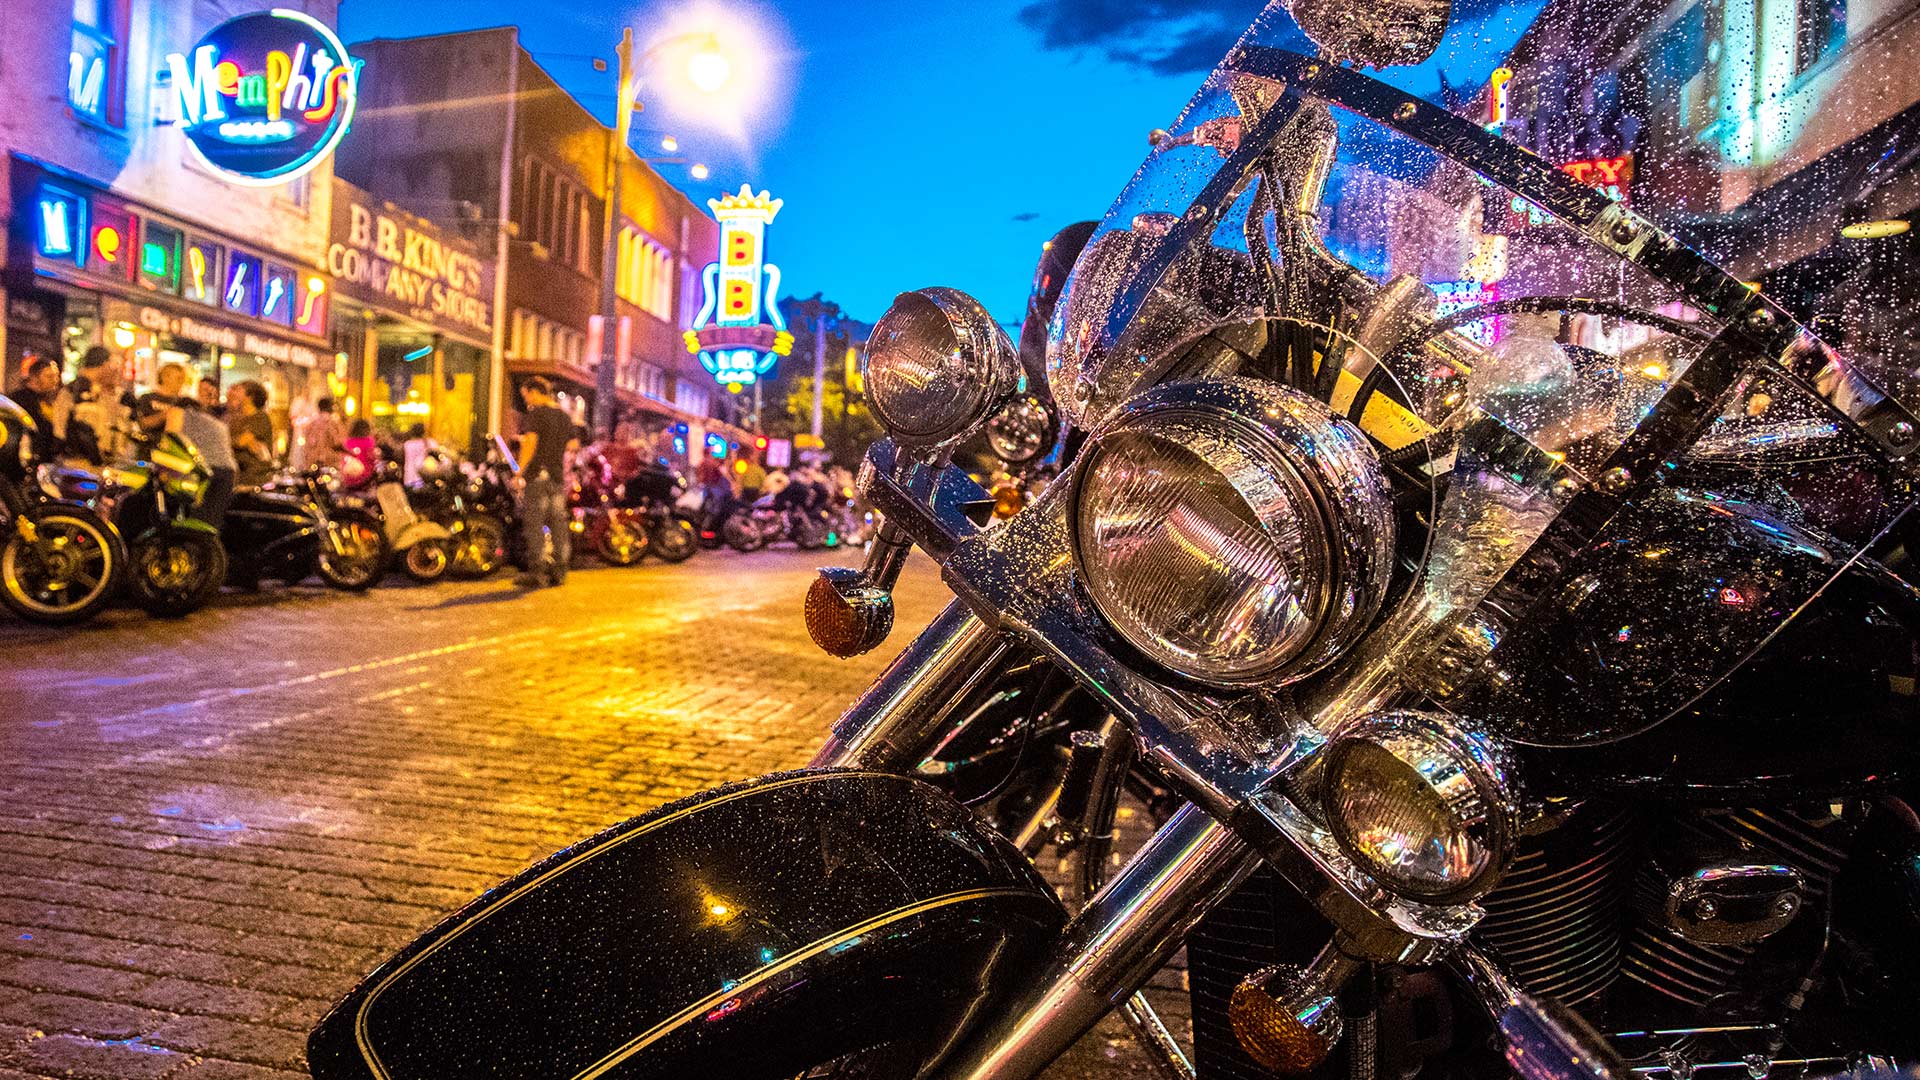 motorcycles outside bars in memphis